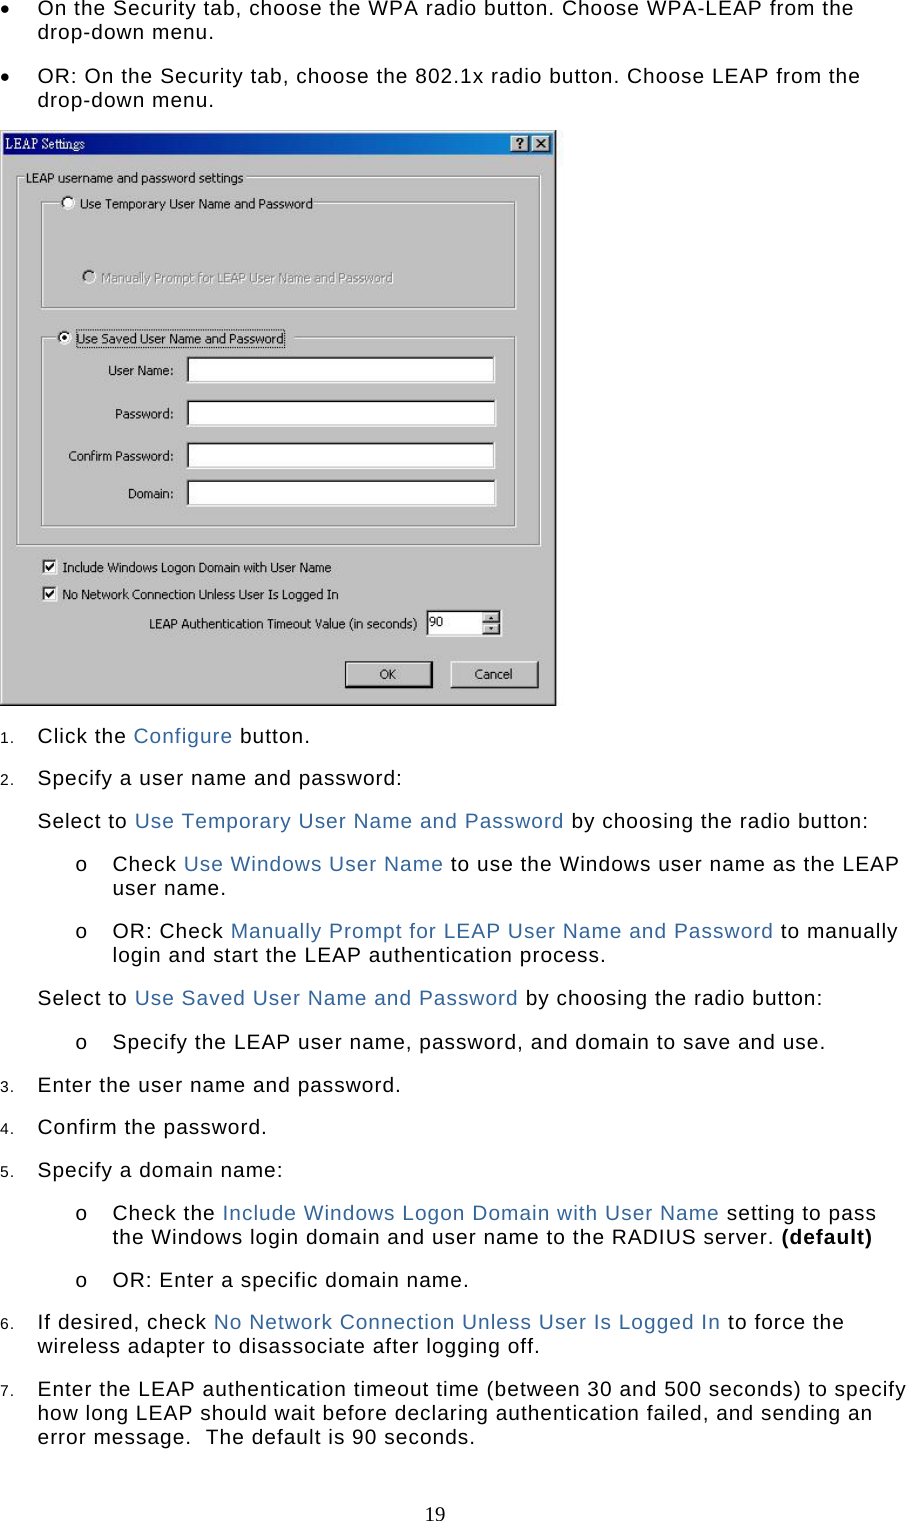  19 •  On the Security tab, choose the WPA radio button. Choose WPA-LEAP from the drop-down menu.   •  OR: On the Security tab, choose the 802.1x radio button. Choose LEAP from the drop-down menu.   1.  Click the Configure button.  2.  Specify a user name and password:  Select to Use Temporary User Name and Password by choosing the radio button:  o  Check Use Windows User Name to use the Windows user name as the LEAP user name.  o  OR: Check Manually Prompt for LEAP User Name and Password to manually login and start the LEAP authentication process.   Select to Use Saved User Name and Password by choosing the radio button:  o  Specify the LEAP user name, password, and domain to save and use.    3.  Enter the user name and password.  4.  Confirm the password.  5.  Specify a domain name:  o  Check the Include Windows Logon Domain with User Name setting to pass the Windows login domain and user name to the RADIUS server. (default)  o  OR: Enter a specific domain name.  6.  If desired, check No Network Connection Unless User Is Logged In to force the wireless adapter to disassociate after logging off.  7.  Enter the LEAP authentication timeout time (between 30 and 500 seconds) to specify how long LEAP should wait before declaring authentication failed, and sending an error message.  The default is 90 seconds.  